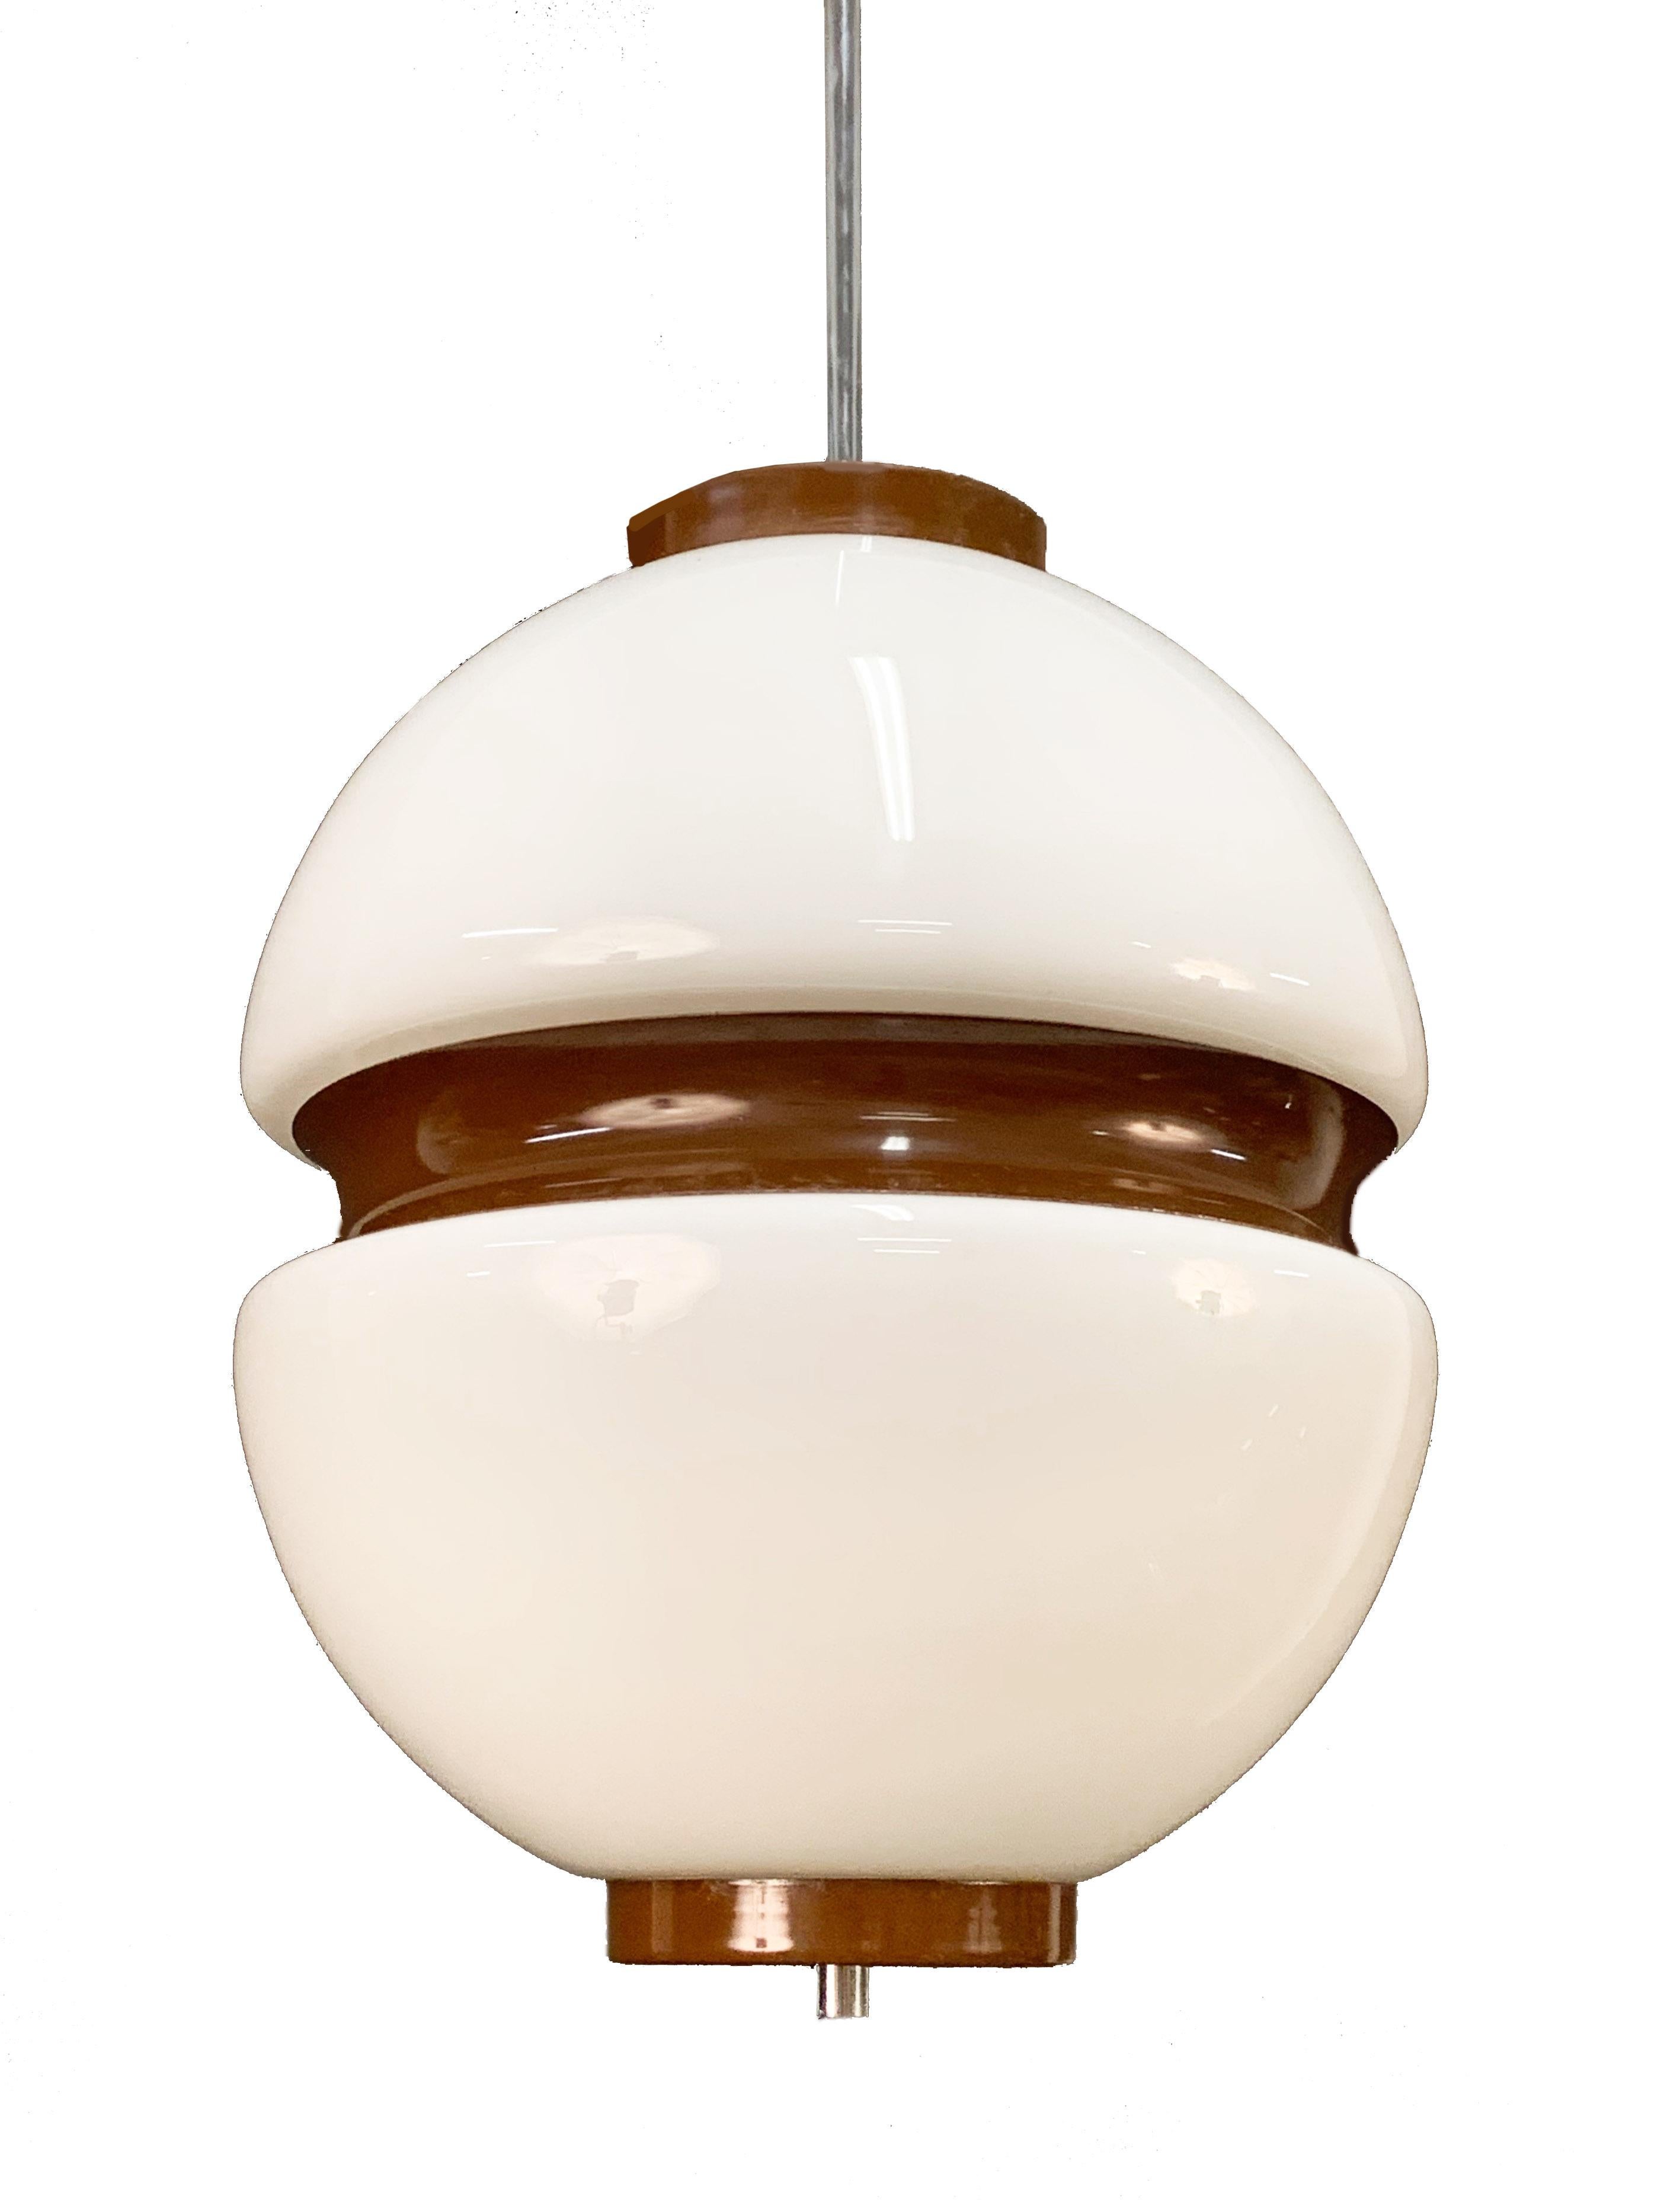 Vintage lattimio glass and brown enamelled aluminium chandelier. This wonderful item was produced in Italy during the 1970s.

The smooth lines of the white glass mix smoothly with the brown aluminium producing an elegant effect.

This piece will